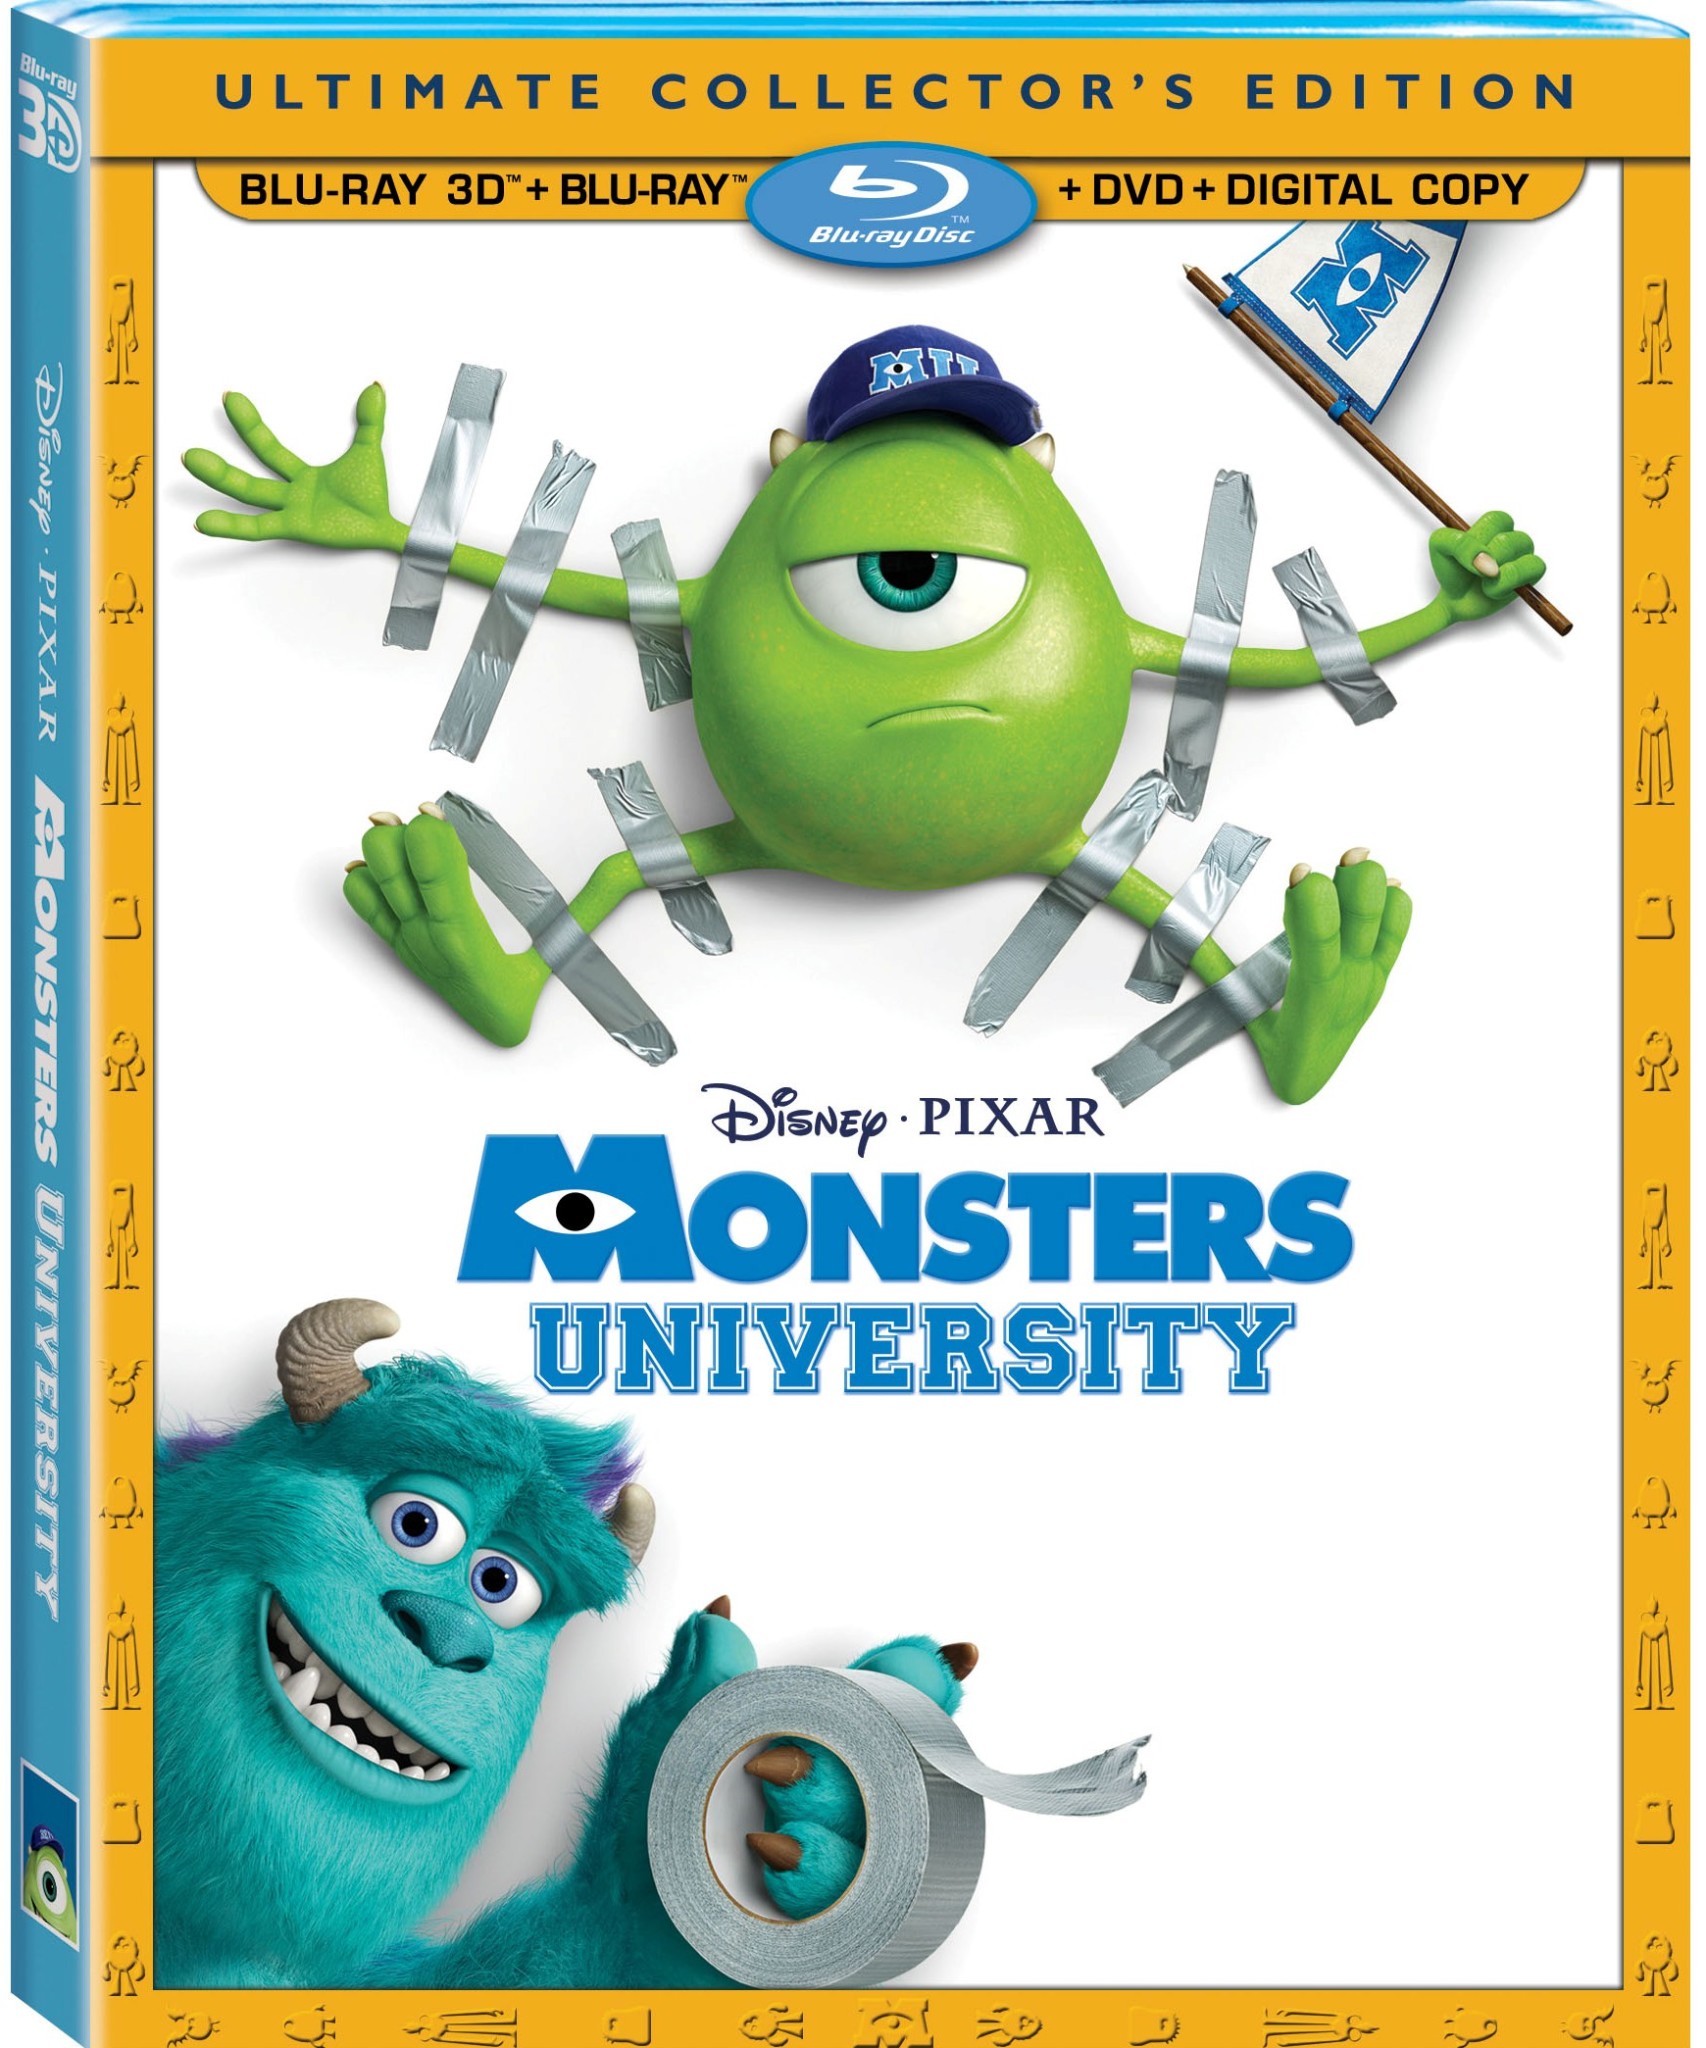 Monsters University Coming to Blu-ray and DVD on October 8, 2013